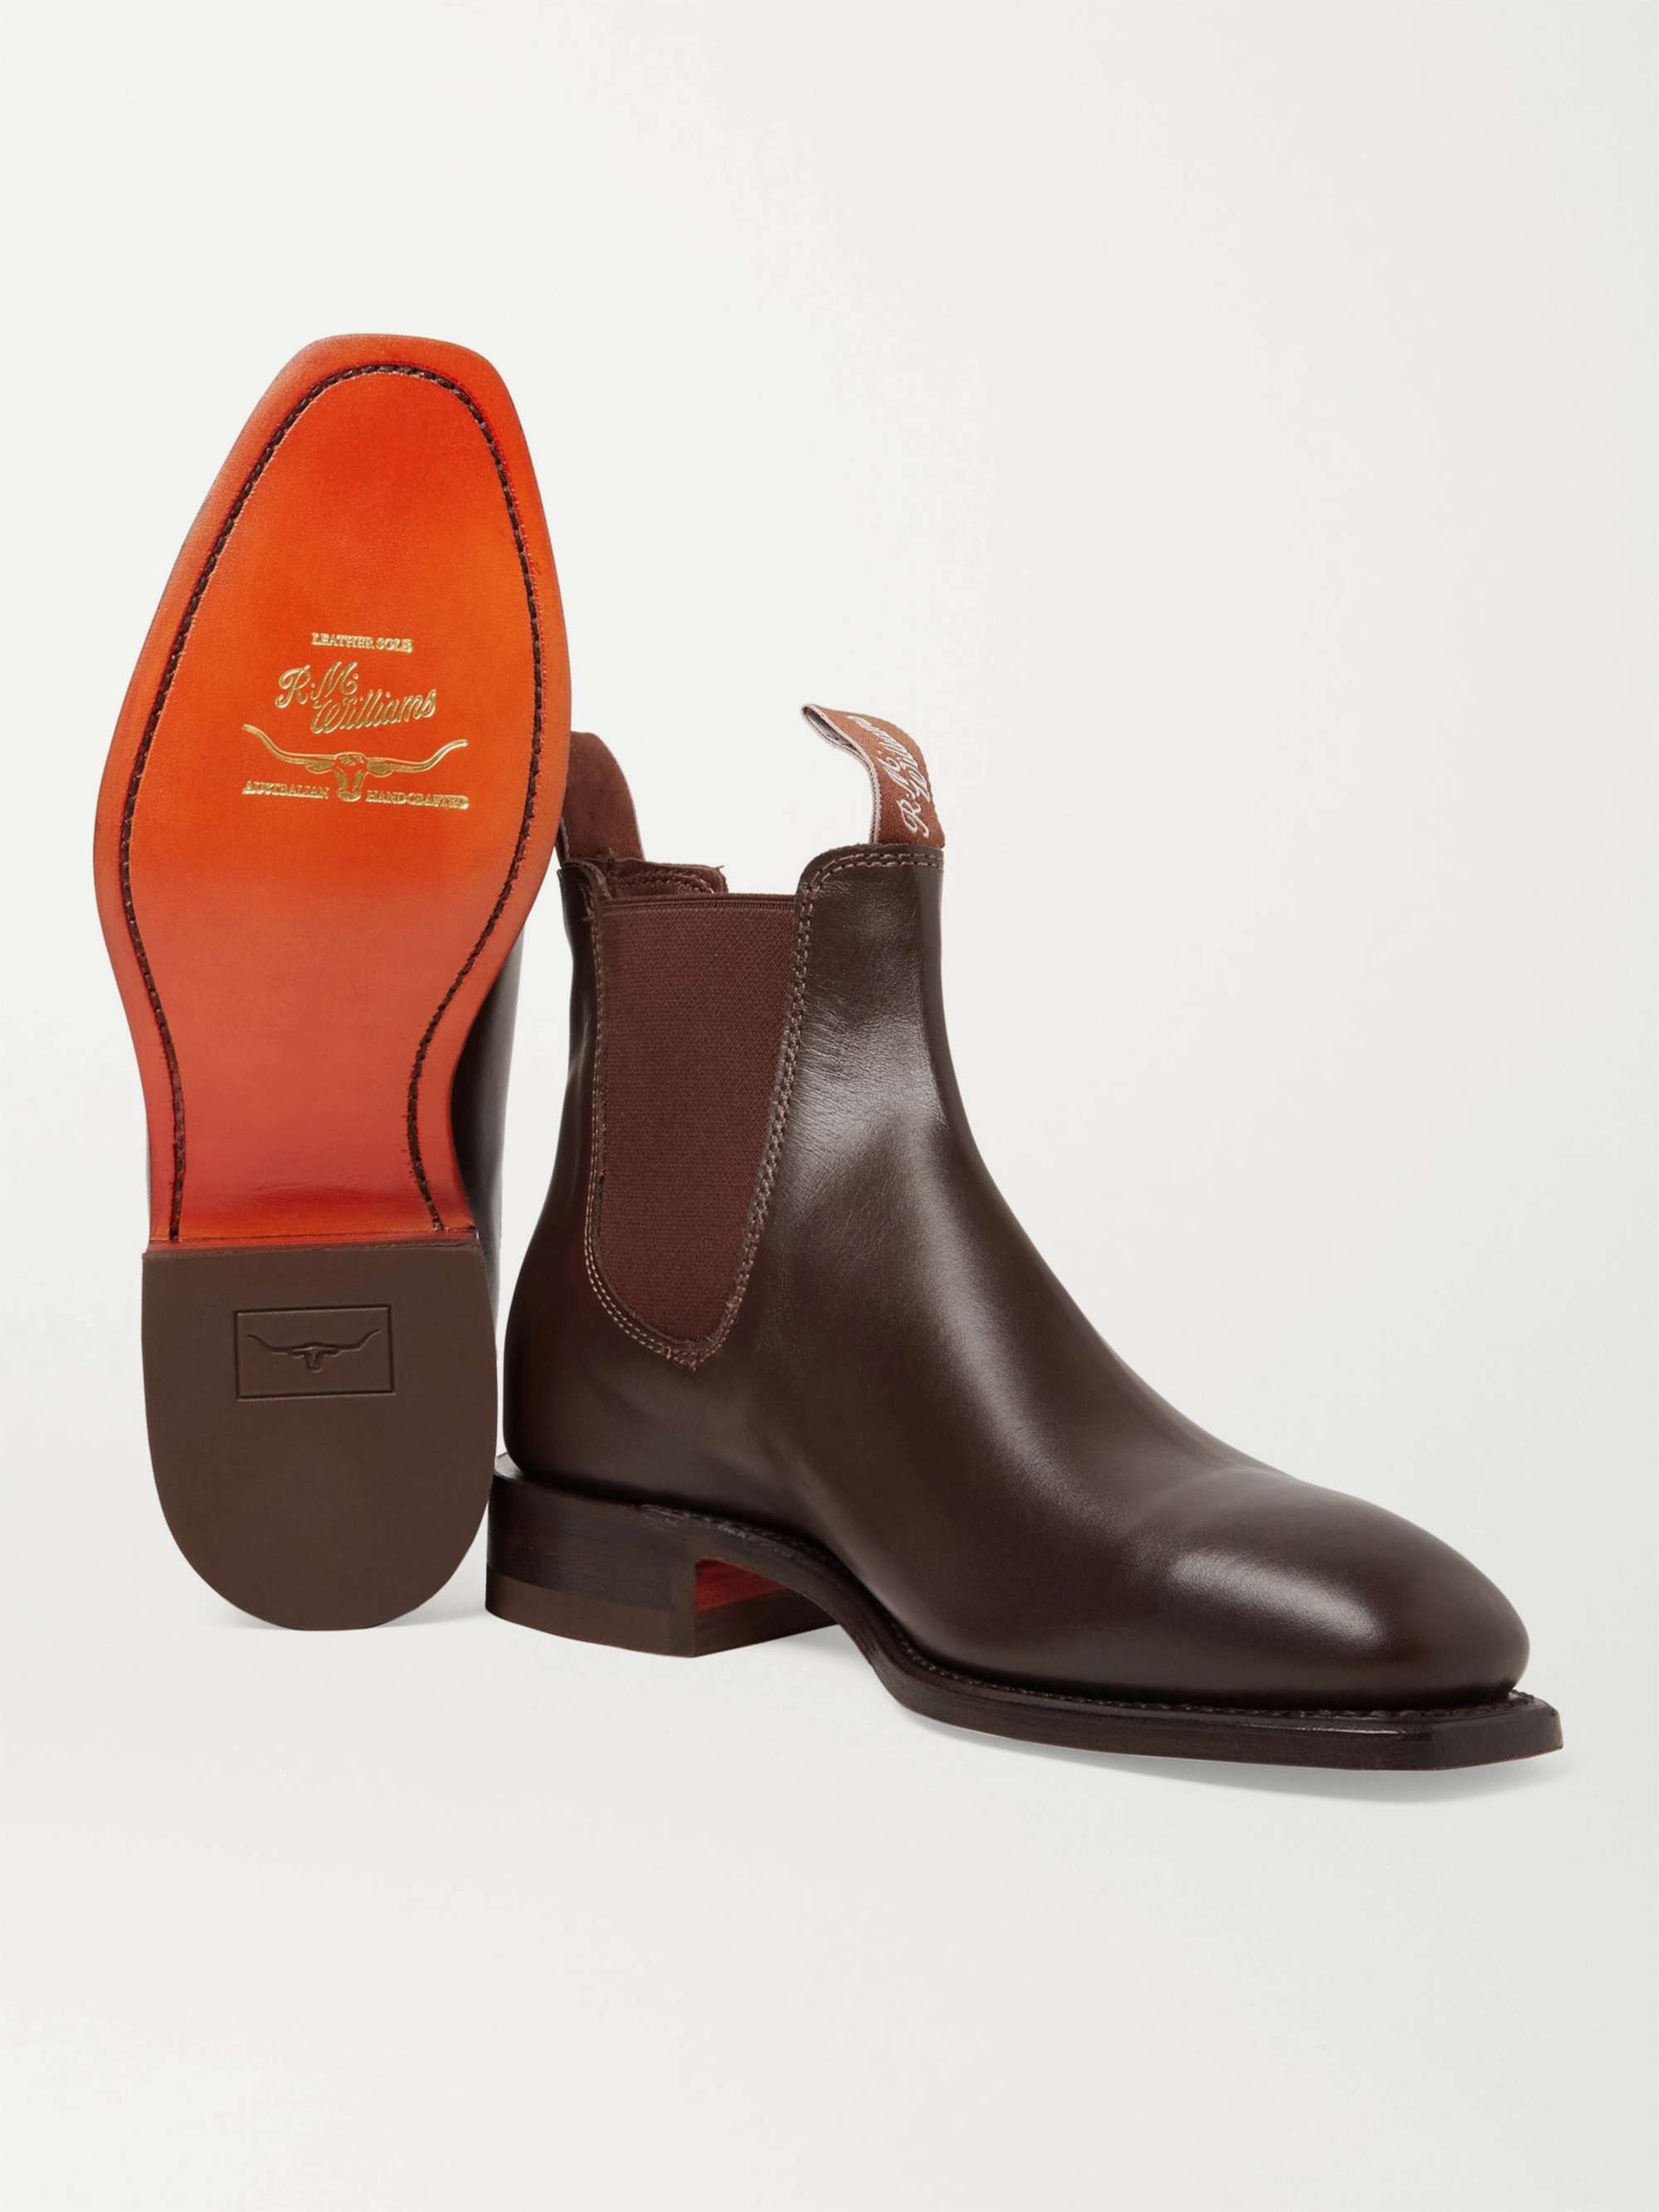 R.M. Williams Wentworth-Chestnut Yearling Shoes - Shoes Online - Lester  Store